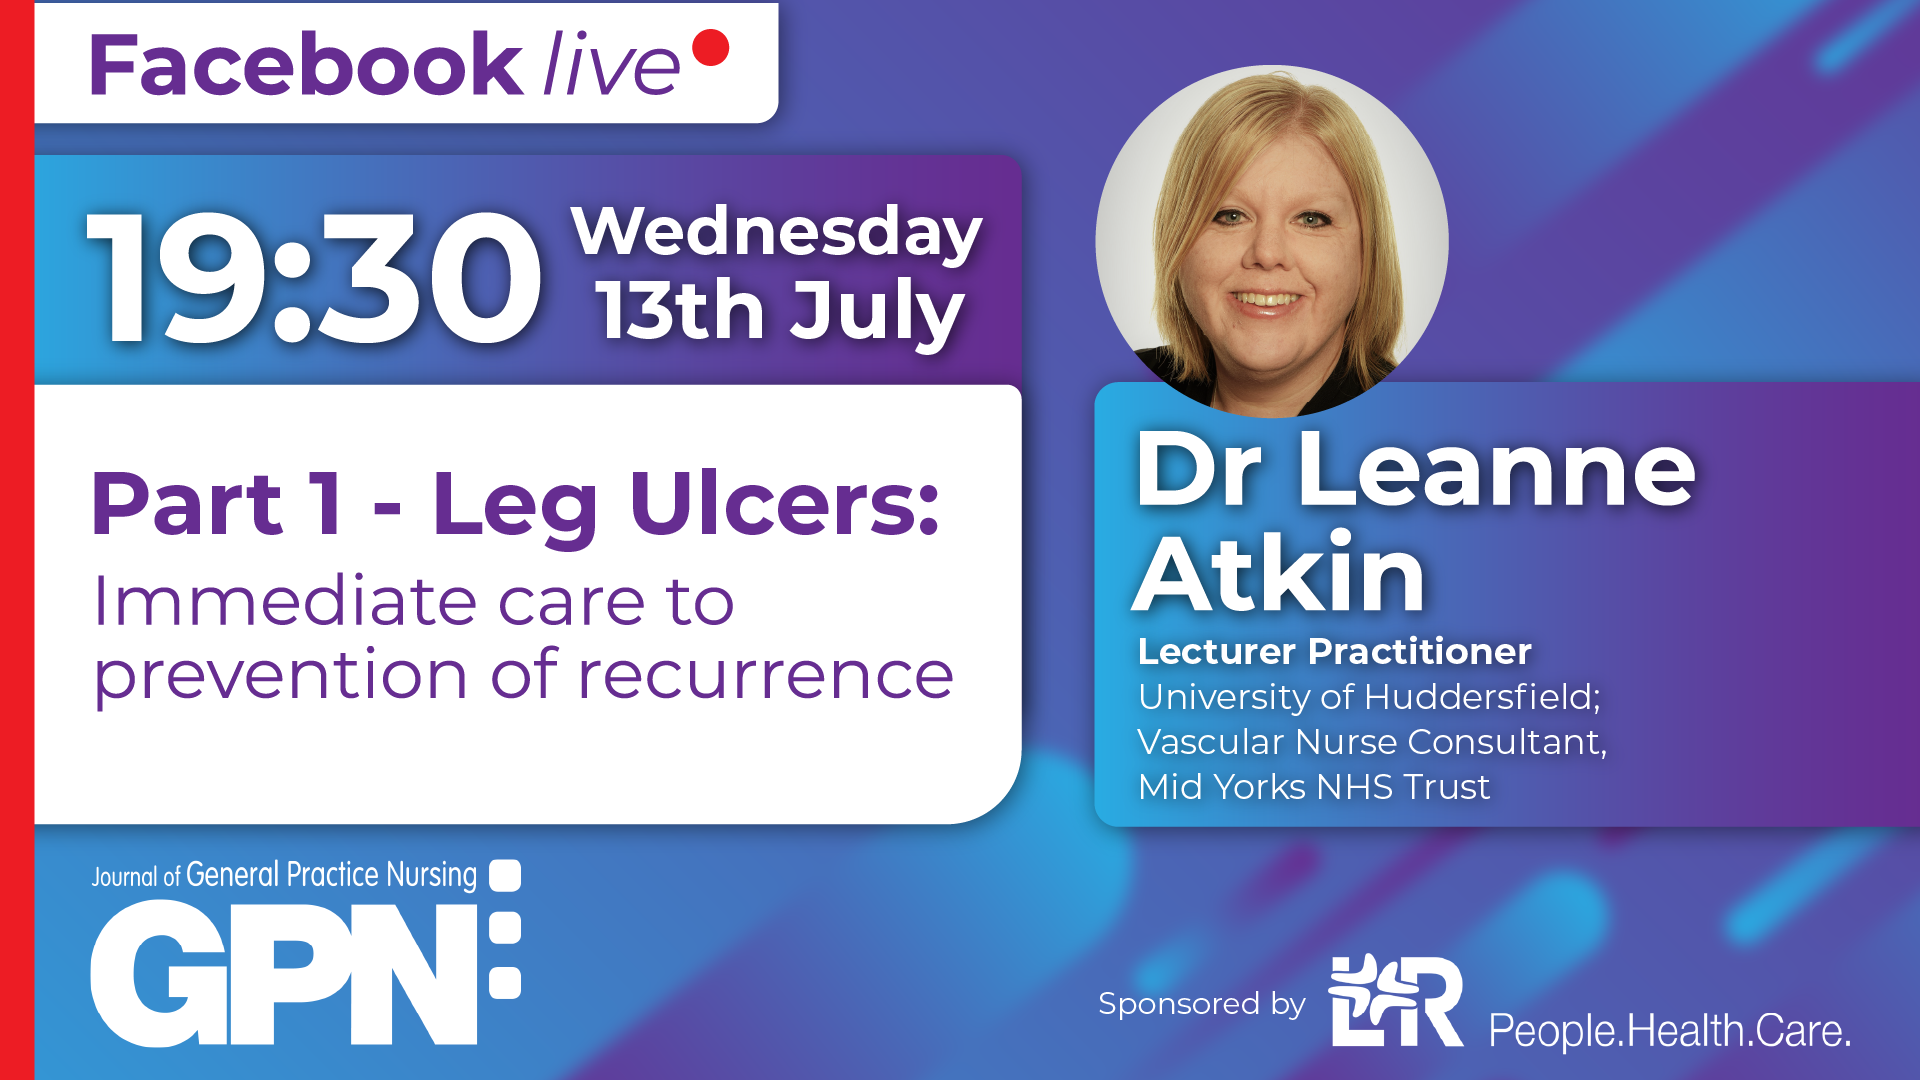 Facebook Live: Part One - Leg Ulcers: Immediate care to prevention of recurrence